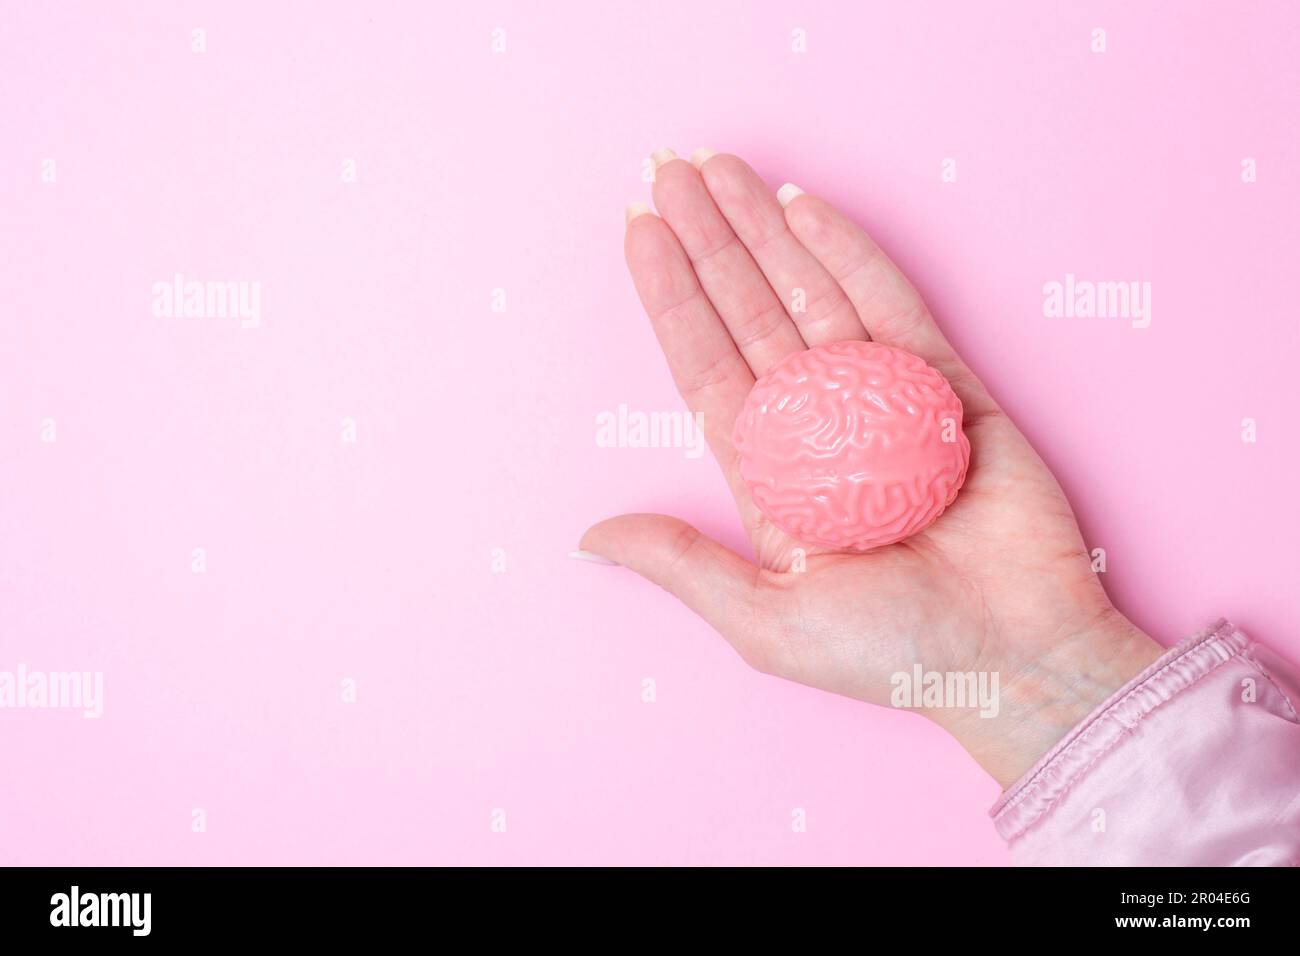 Hand holding pink brain isolated on pink background Stock Photo